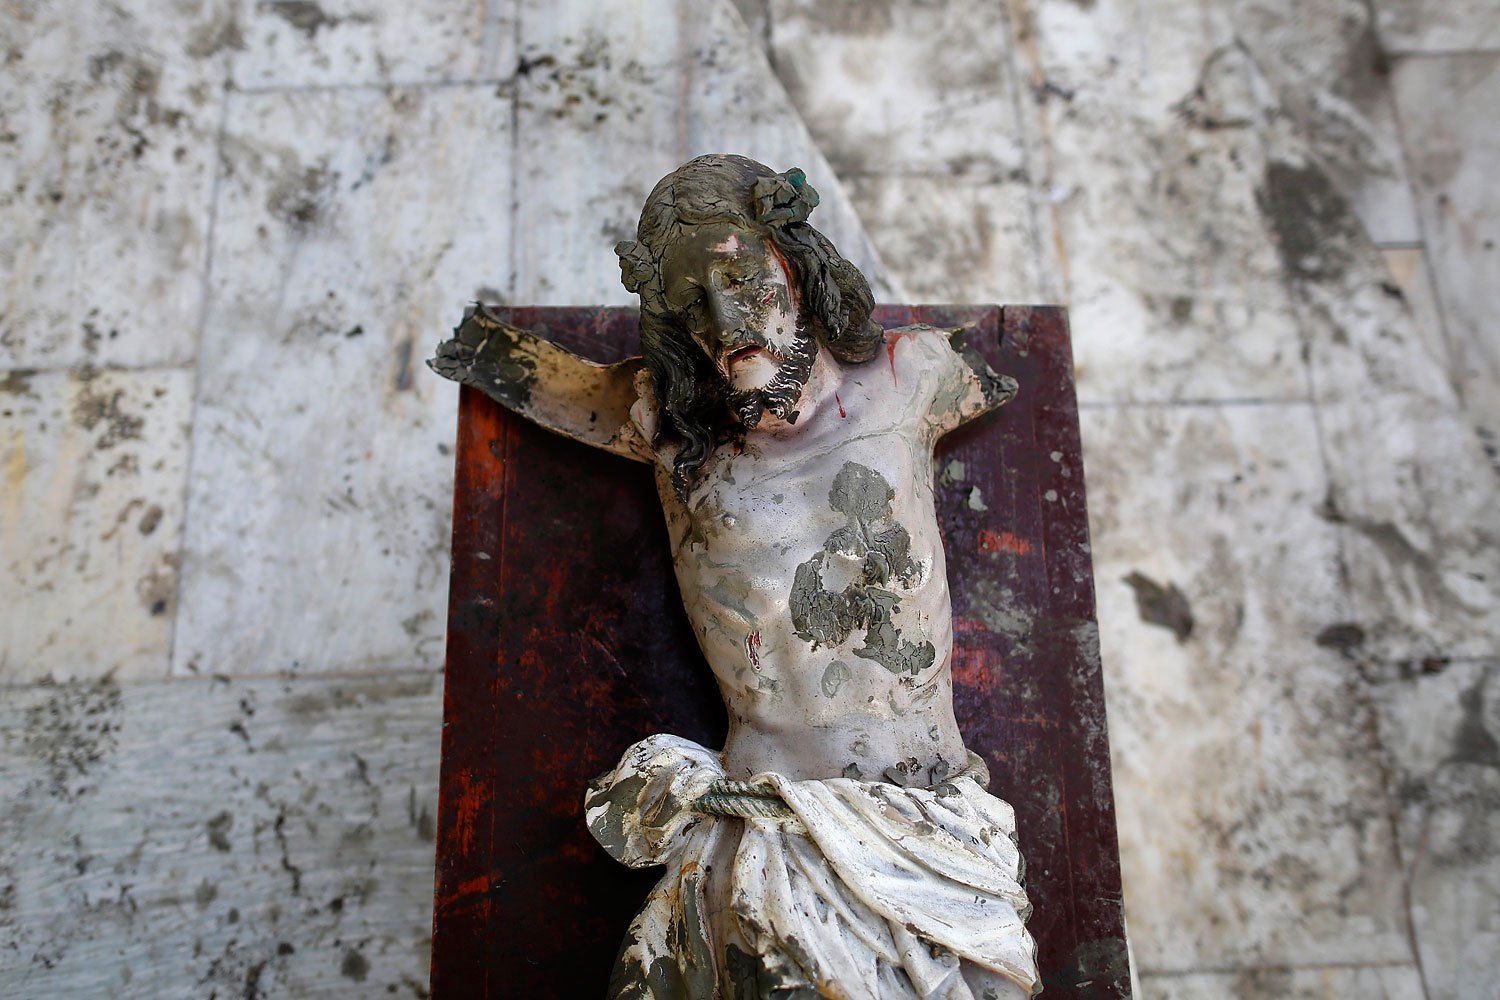 A damaged statue of Jesus Christ that was recovered from rubbles is placed in a church in an area wrecked by Typhoon Haiyan in Tacloban November 21, 2013.